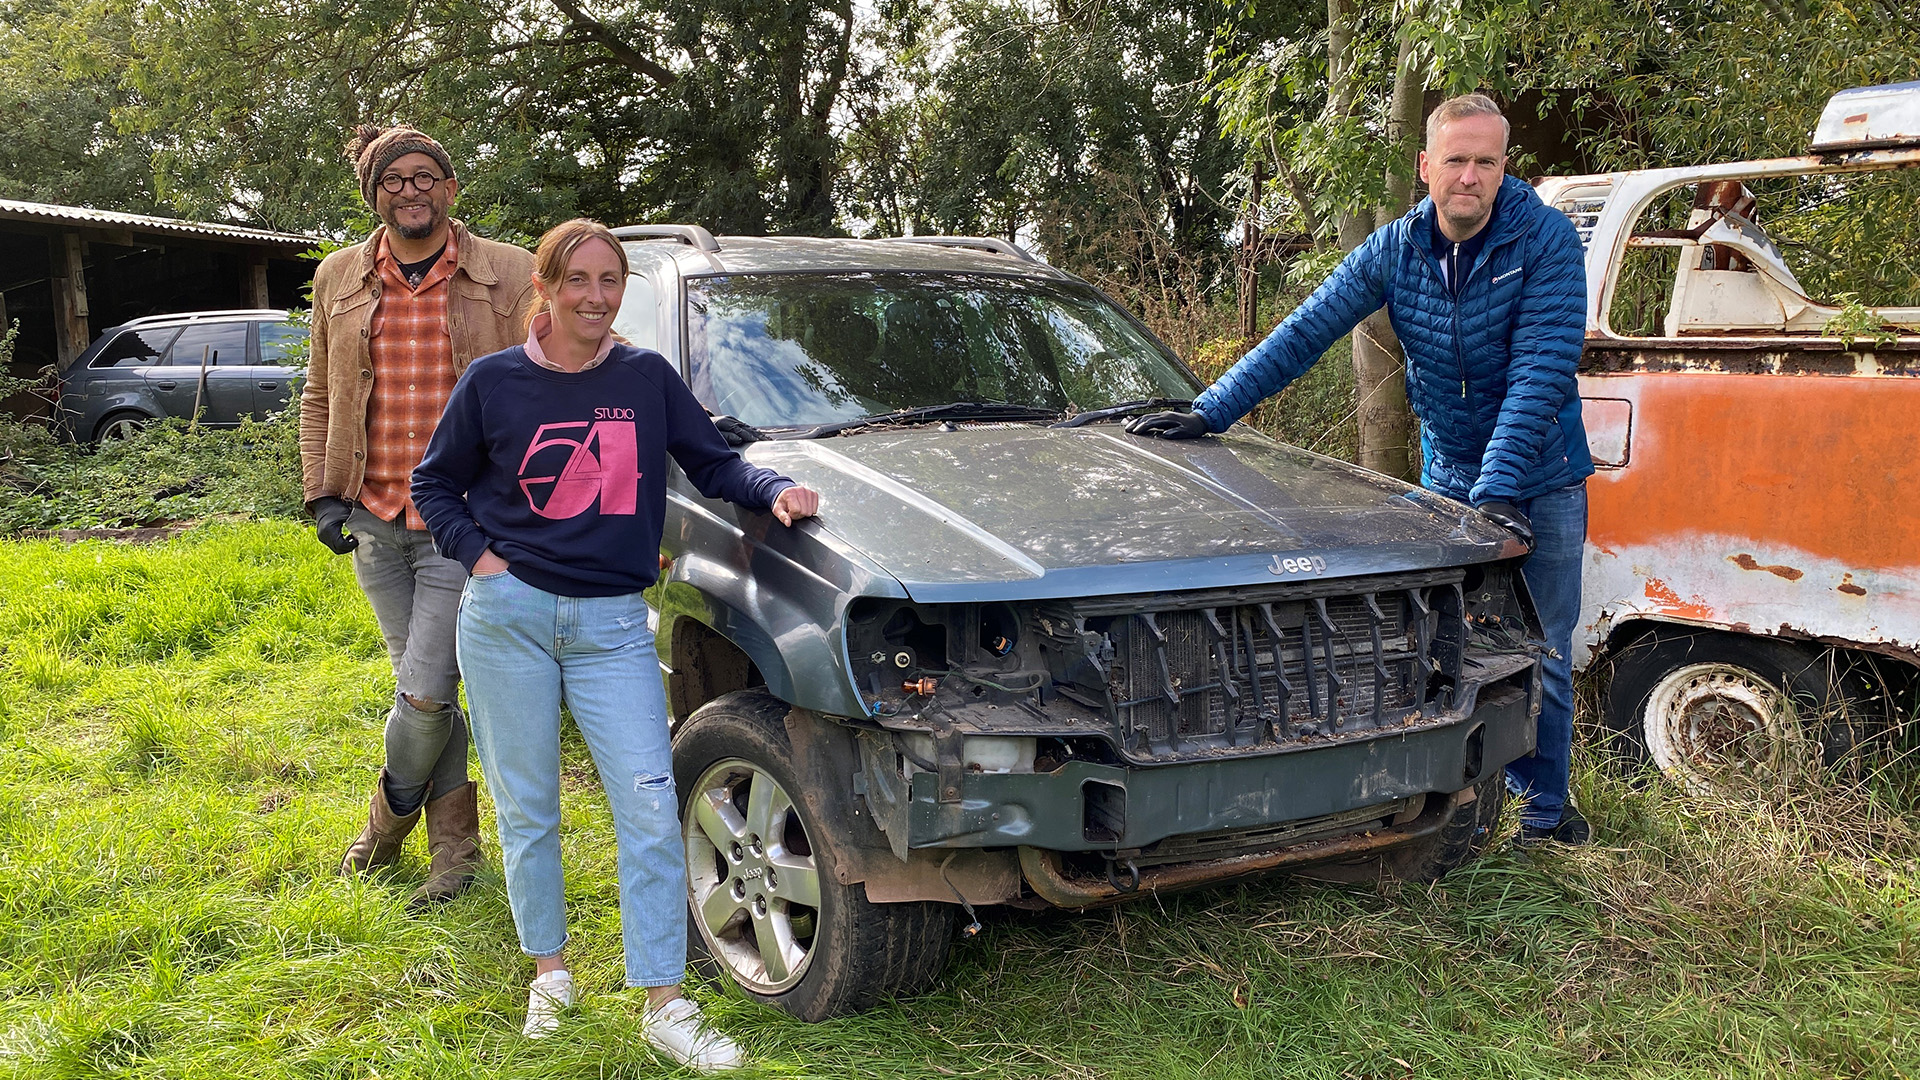 Fuzz Townshend, Sadie and Tim Shaw pose by Ben's Jeep. This is from Car S.O.S. Season 11. [Photo of the day - May 2023]